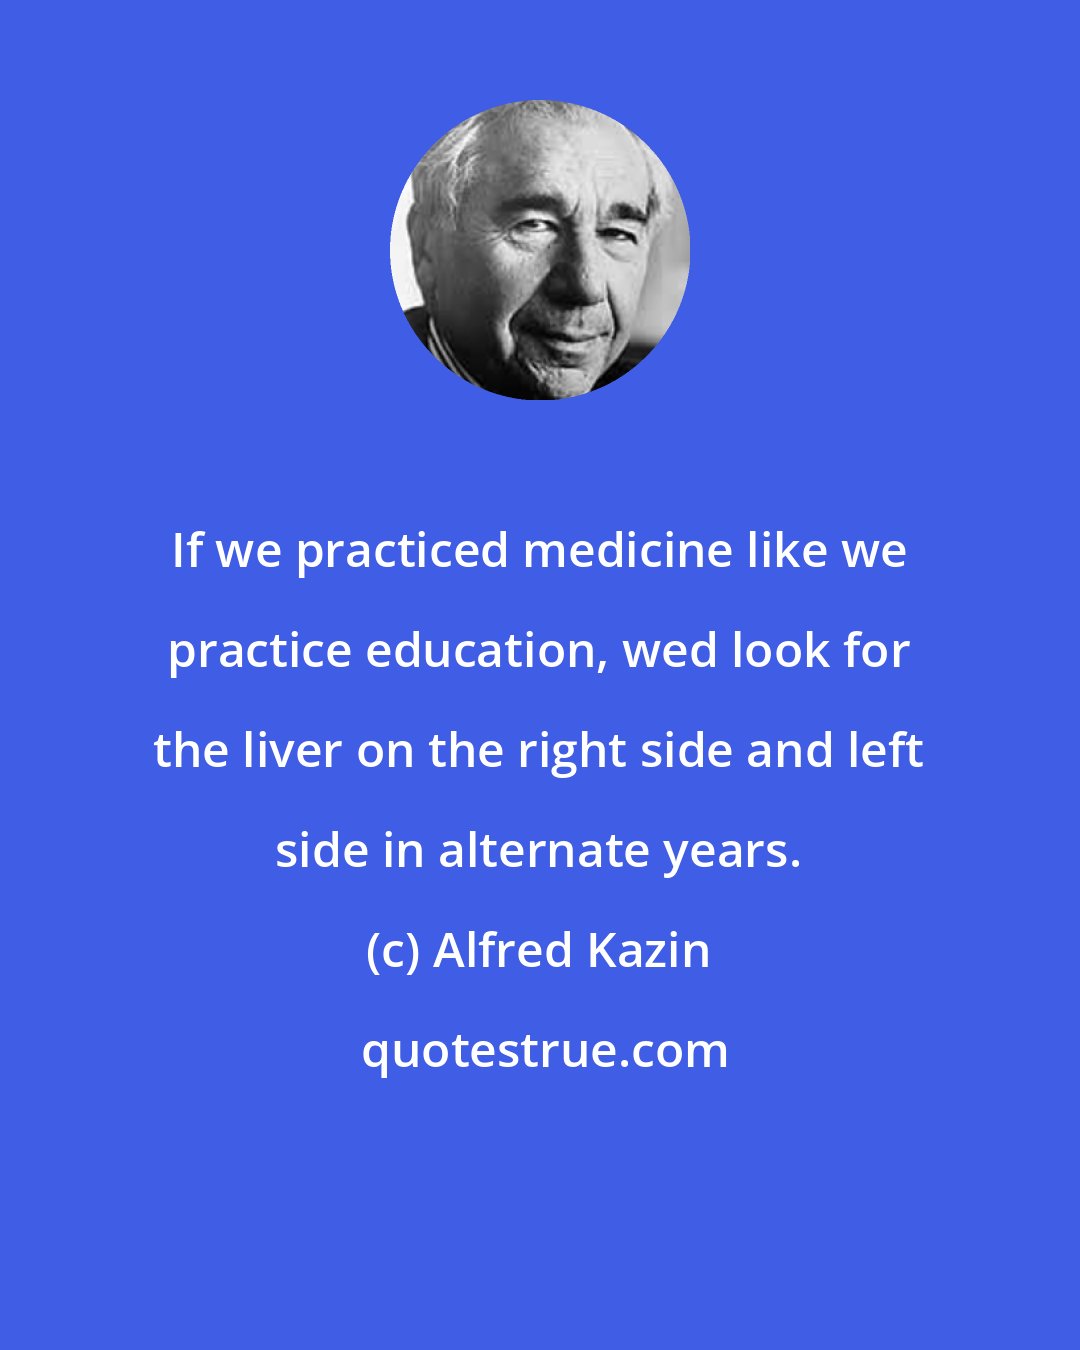 Alfred Kazin: If we practiced medicine like we practice education, wed look for the liver on the right side and left side in alternate years.